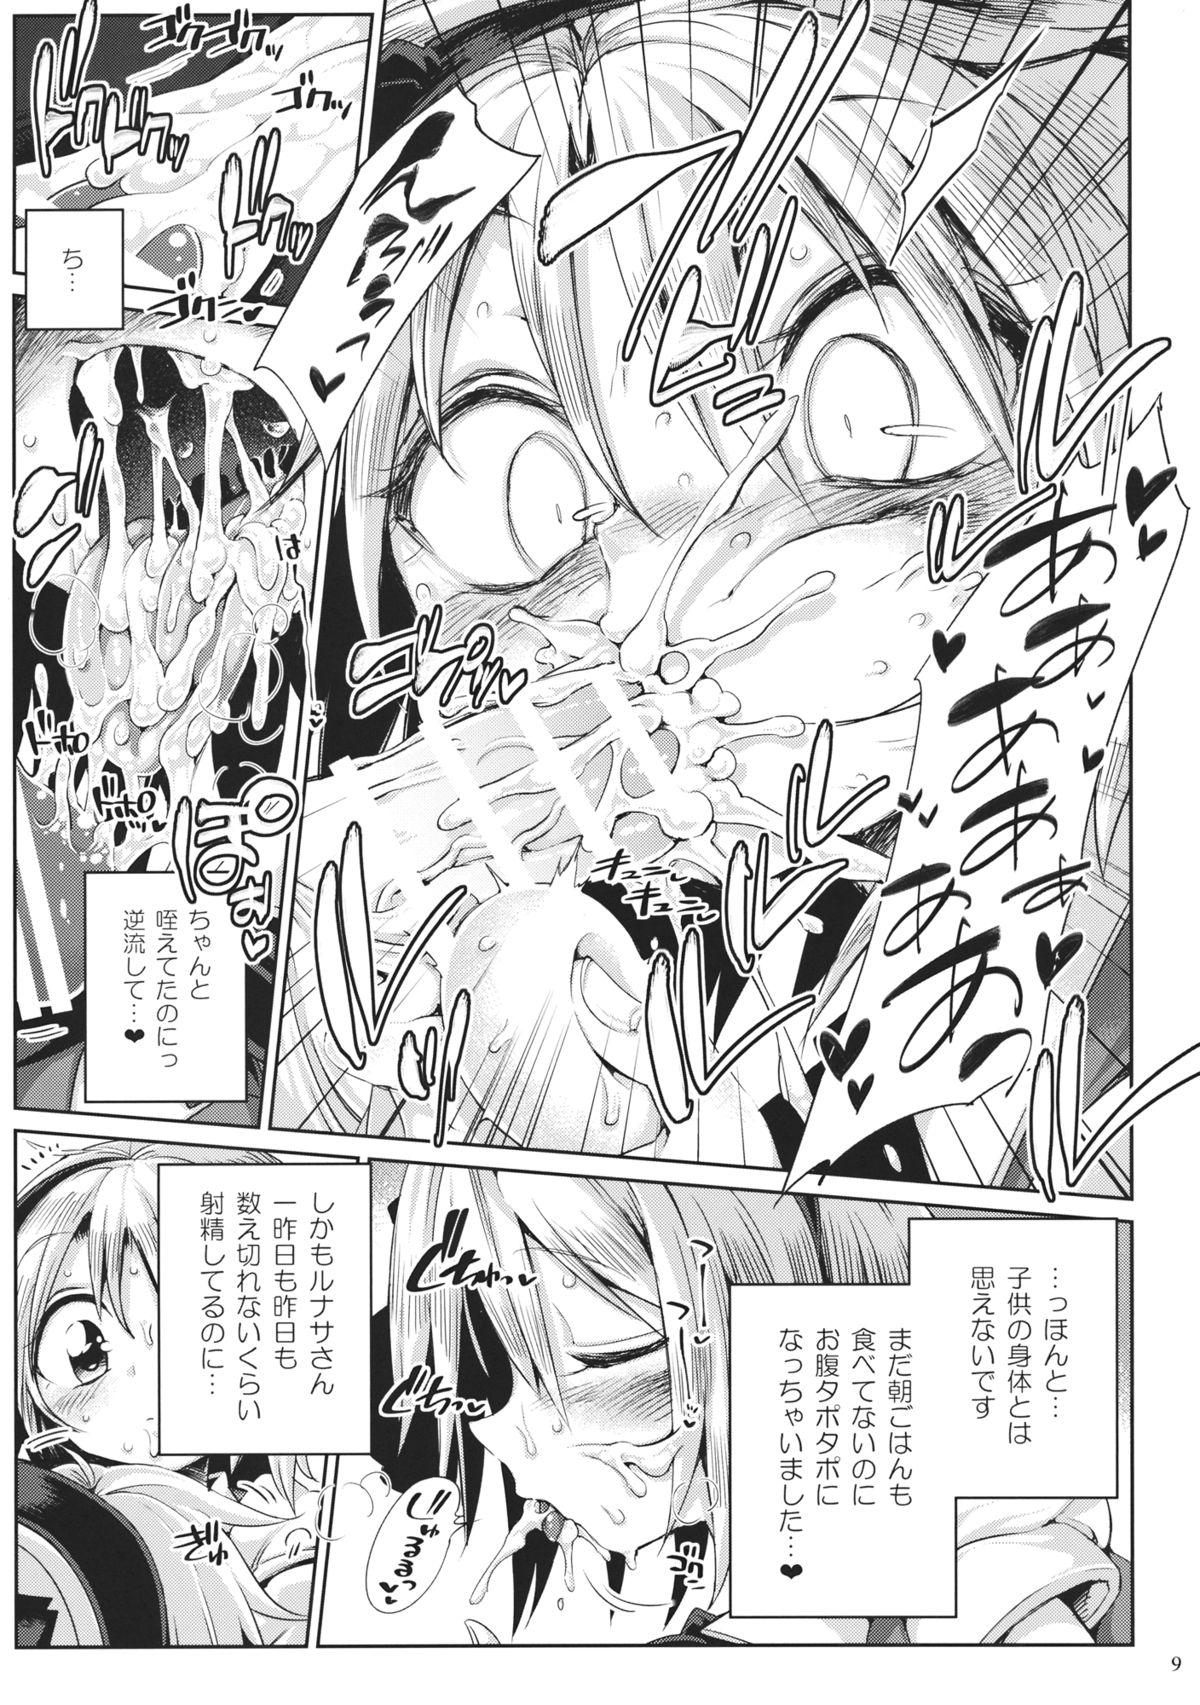 Threeway Watashi no Sunny Berceuse - Touhou project Pigtails - Page 8